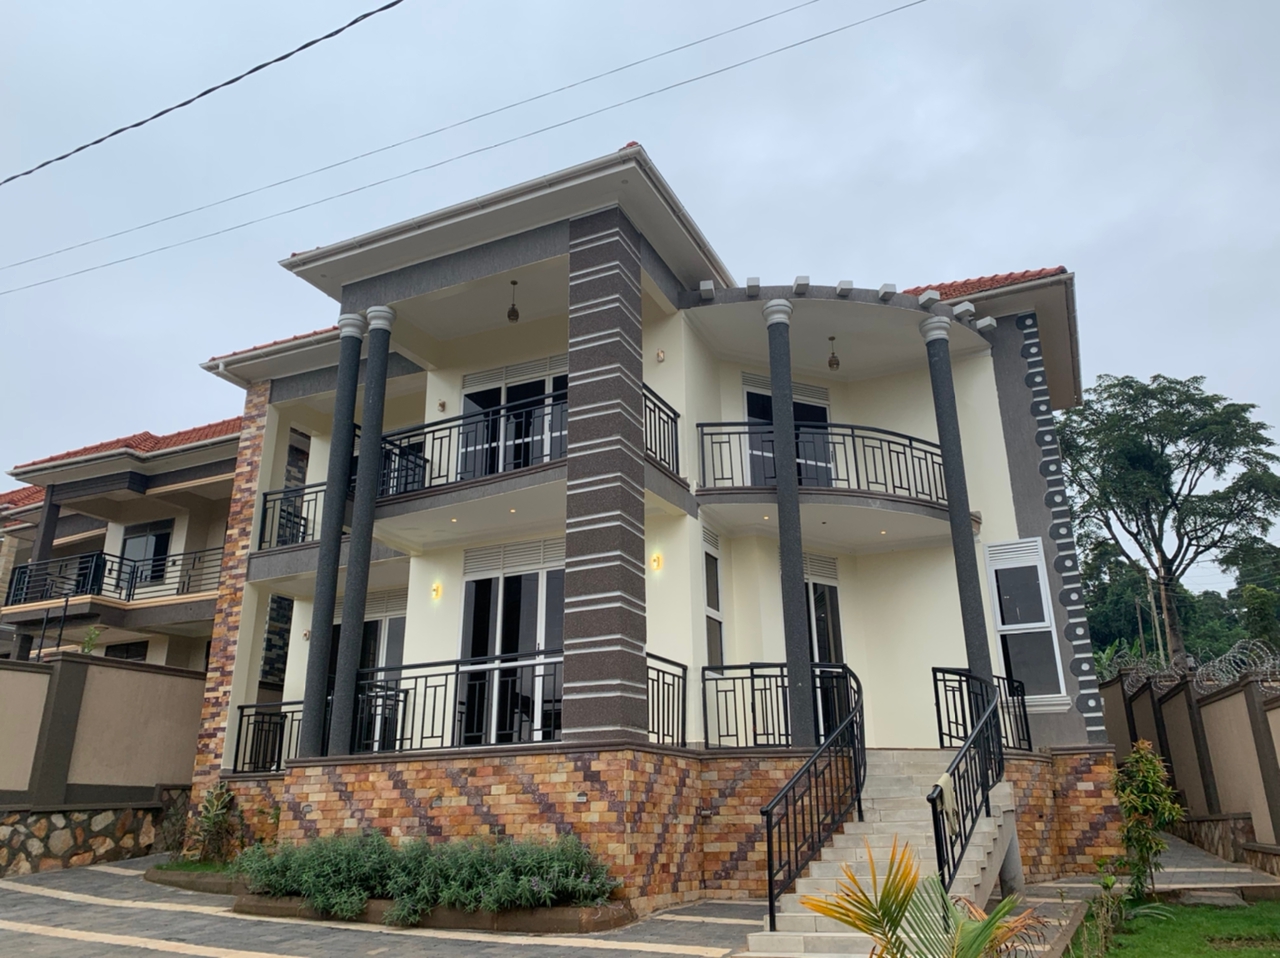 This new house for quick sale in Kiwatule Kampala